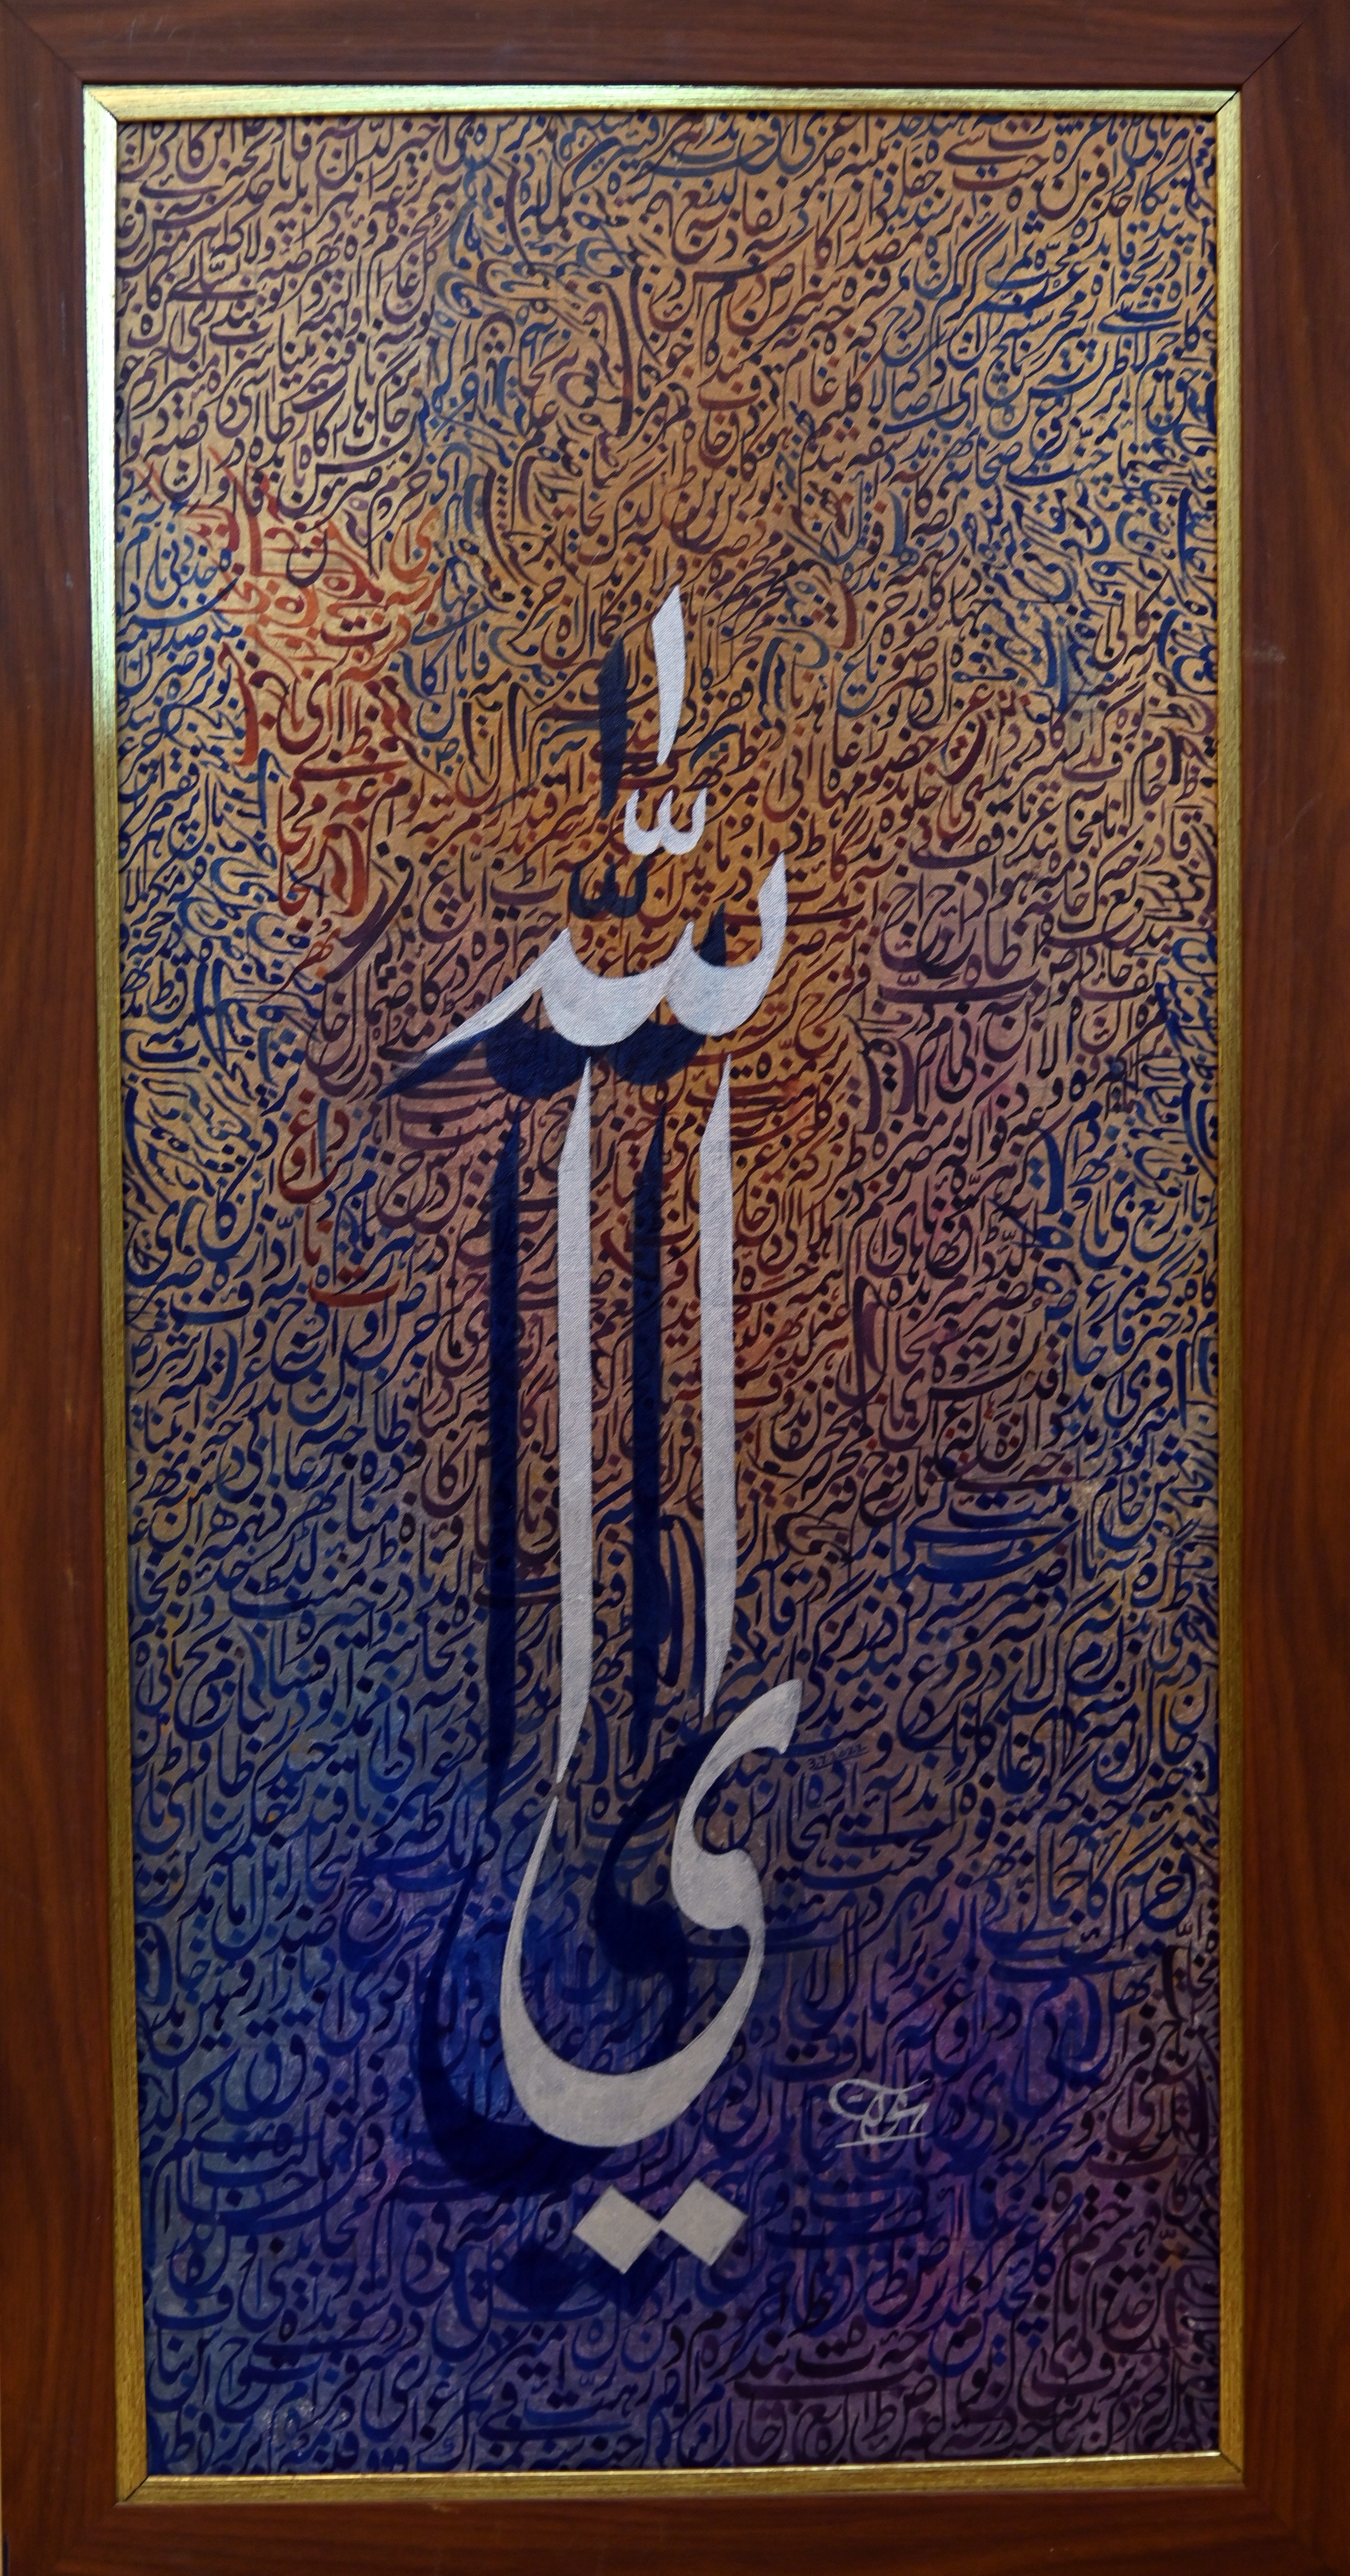 The beautiful painting of Arabic calligraphy